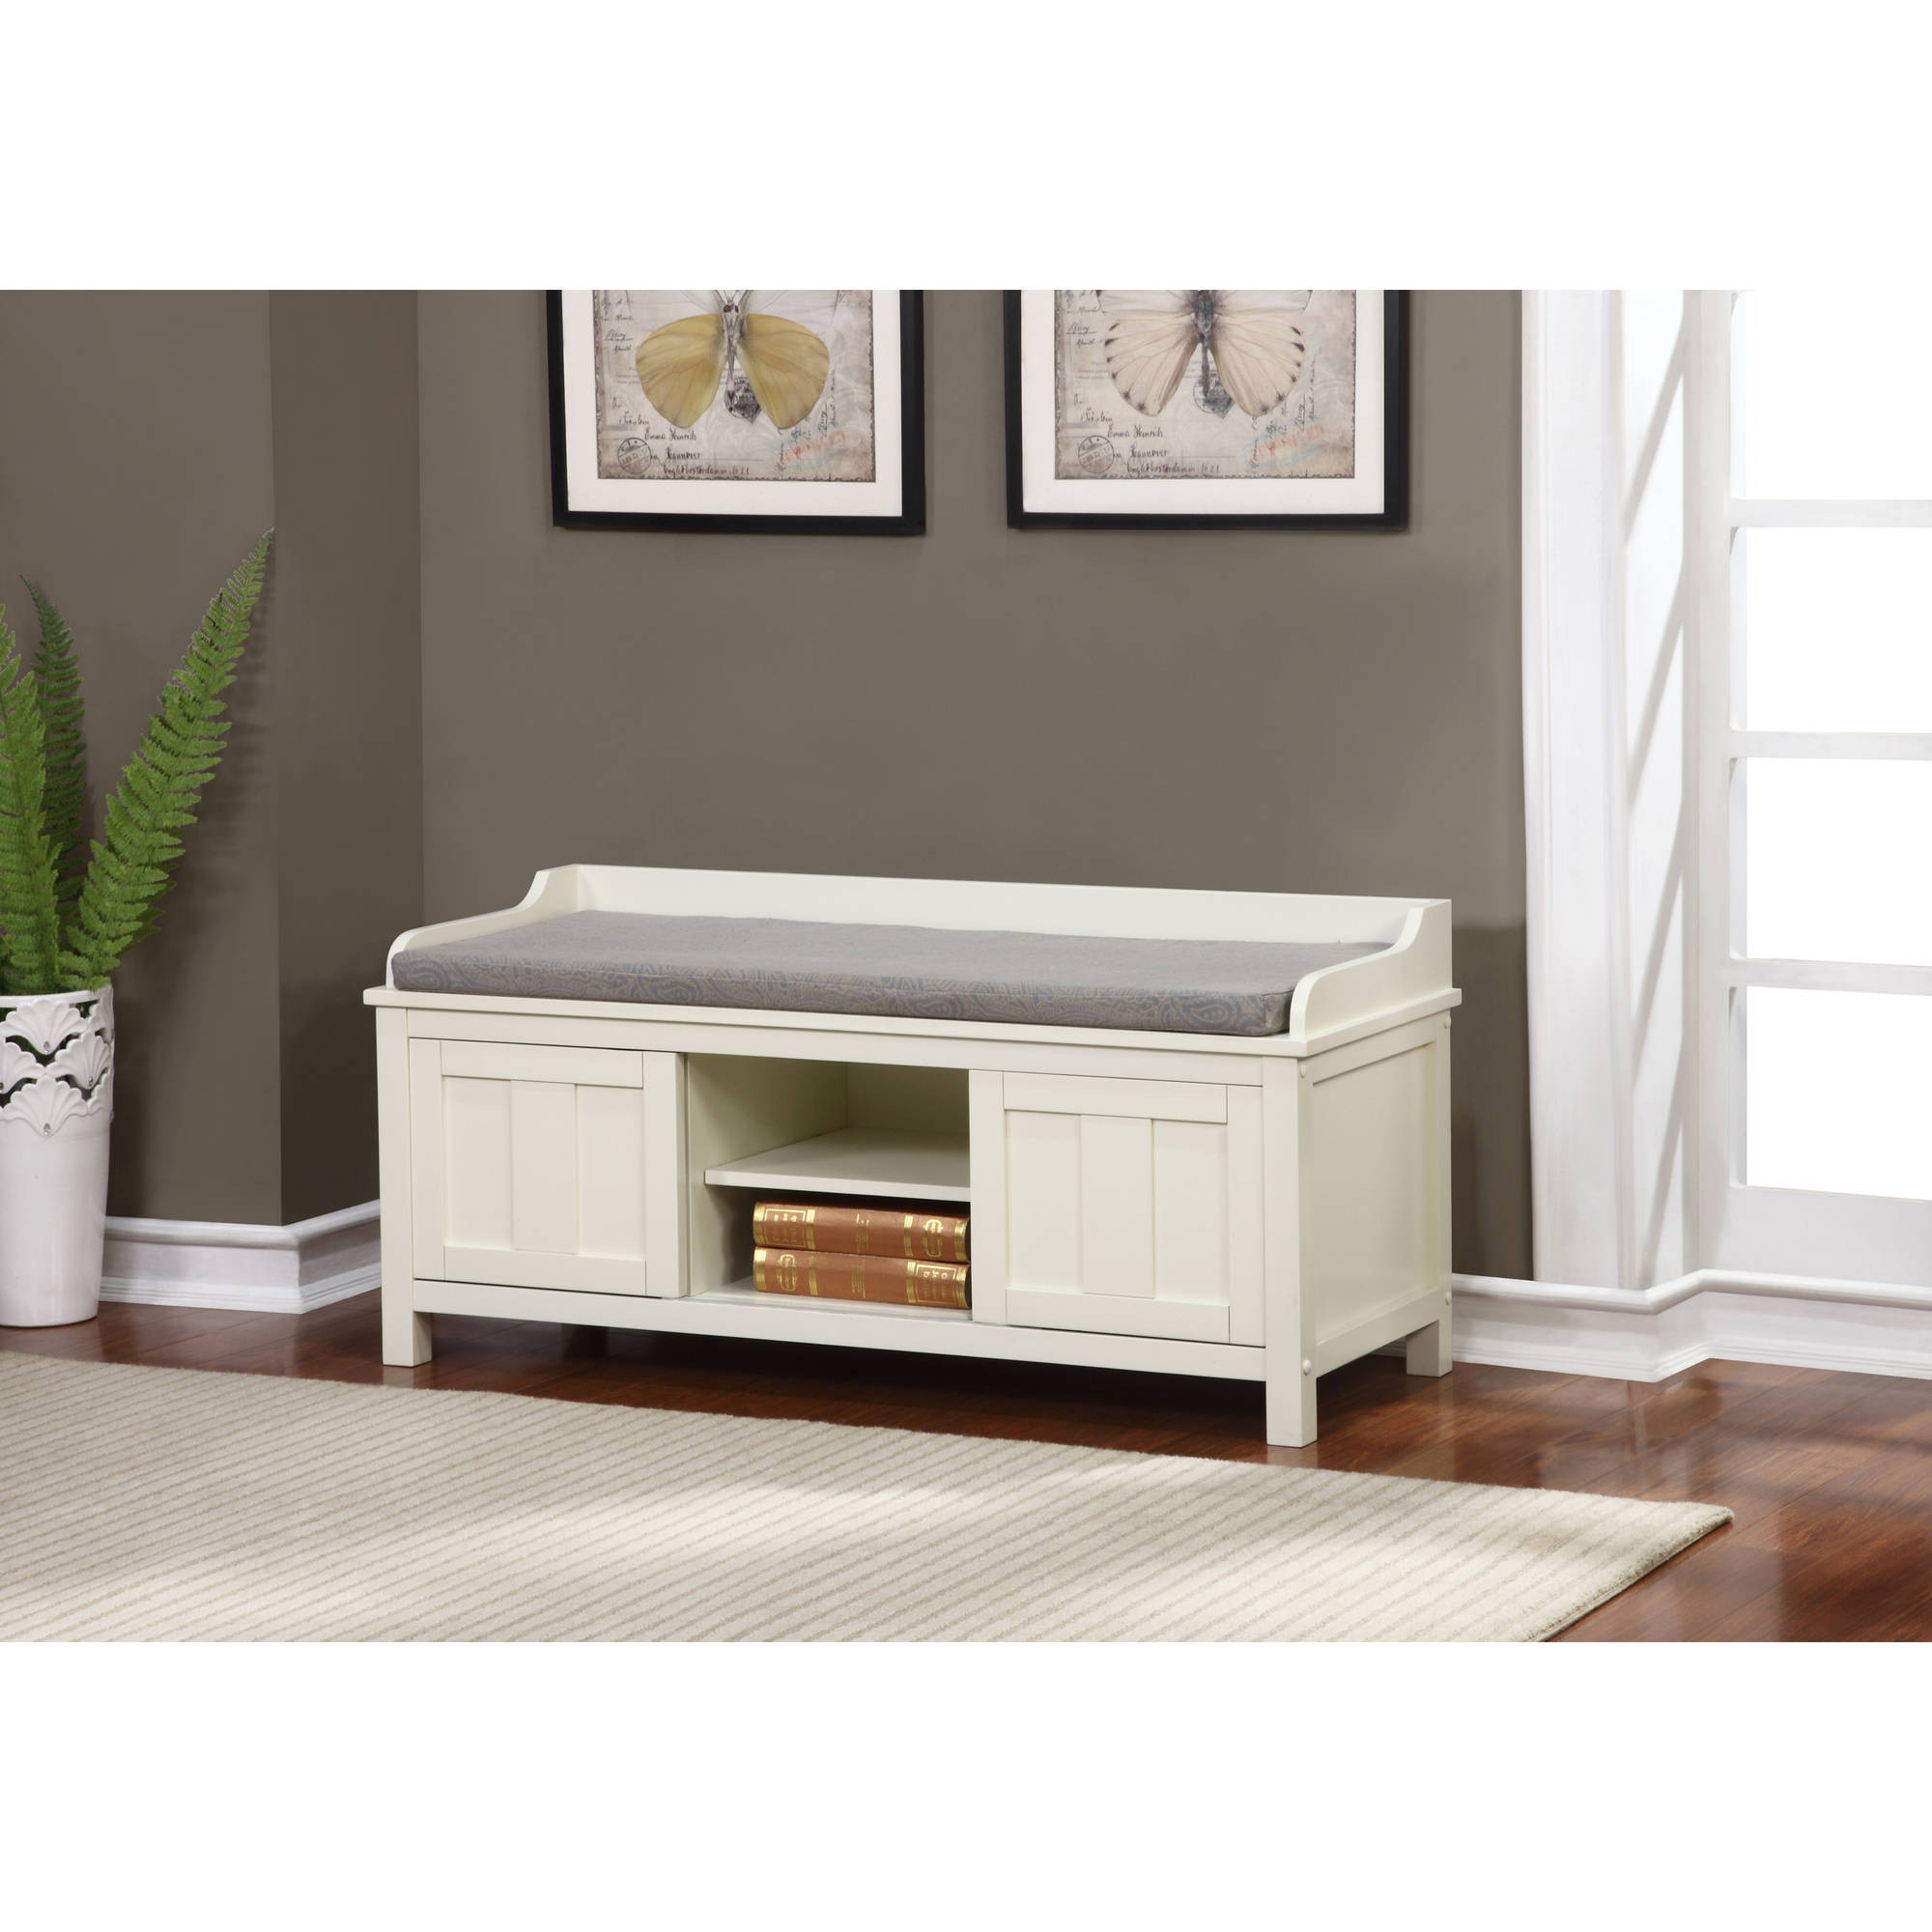 Storage Bench With Doors
 Linon Lakeville 45" Antique White Storage Bench with